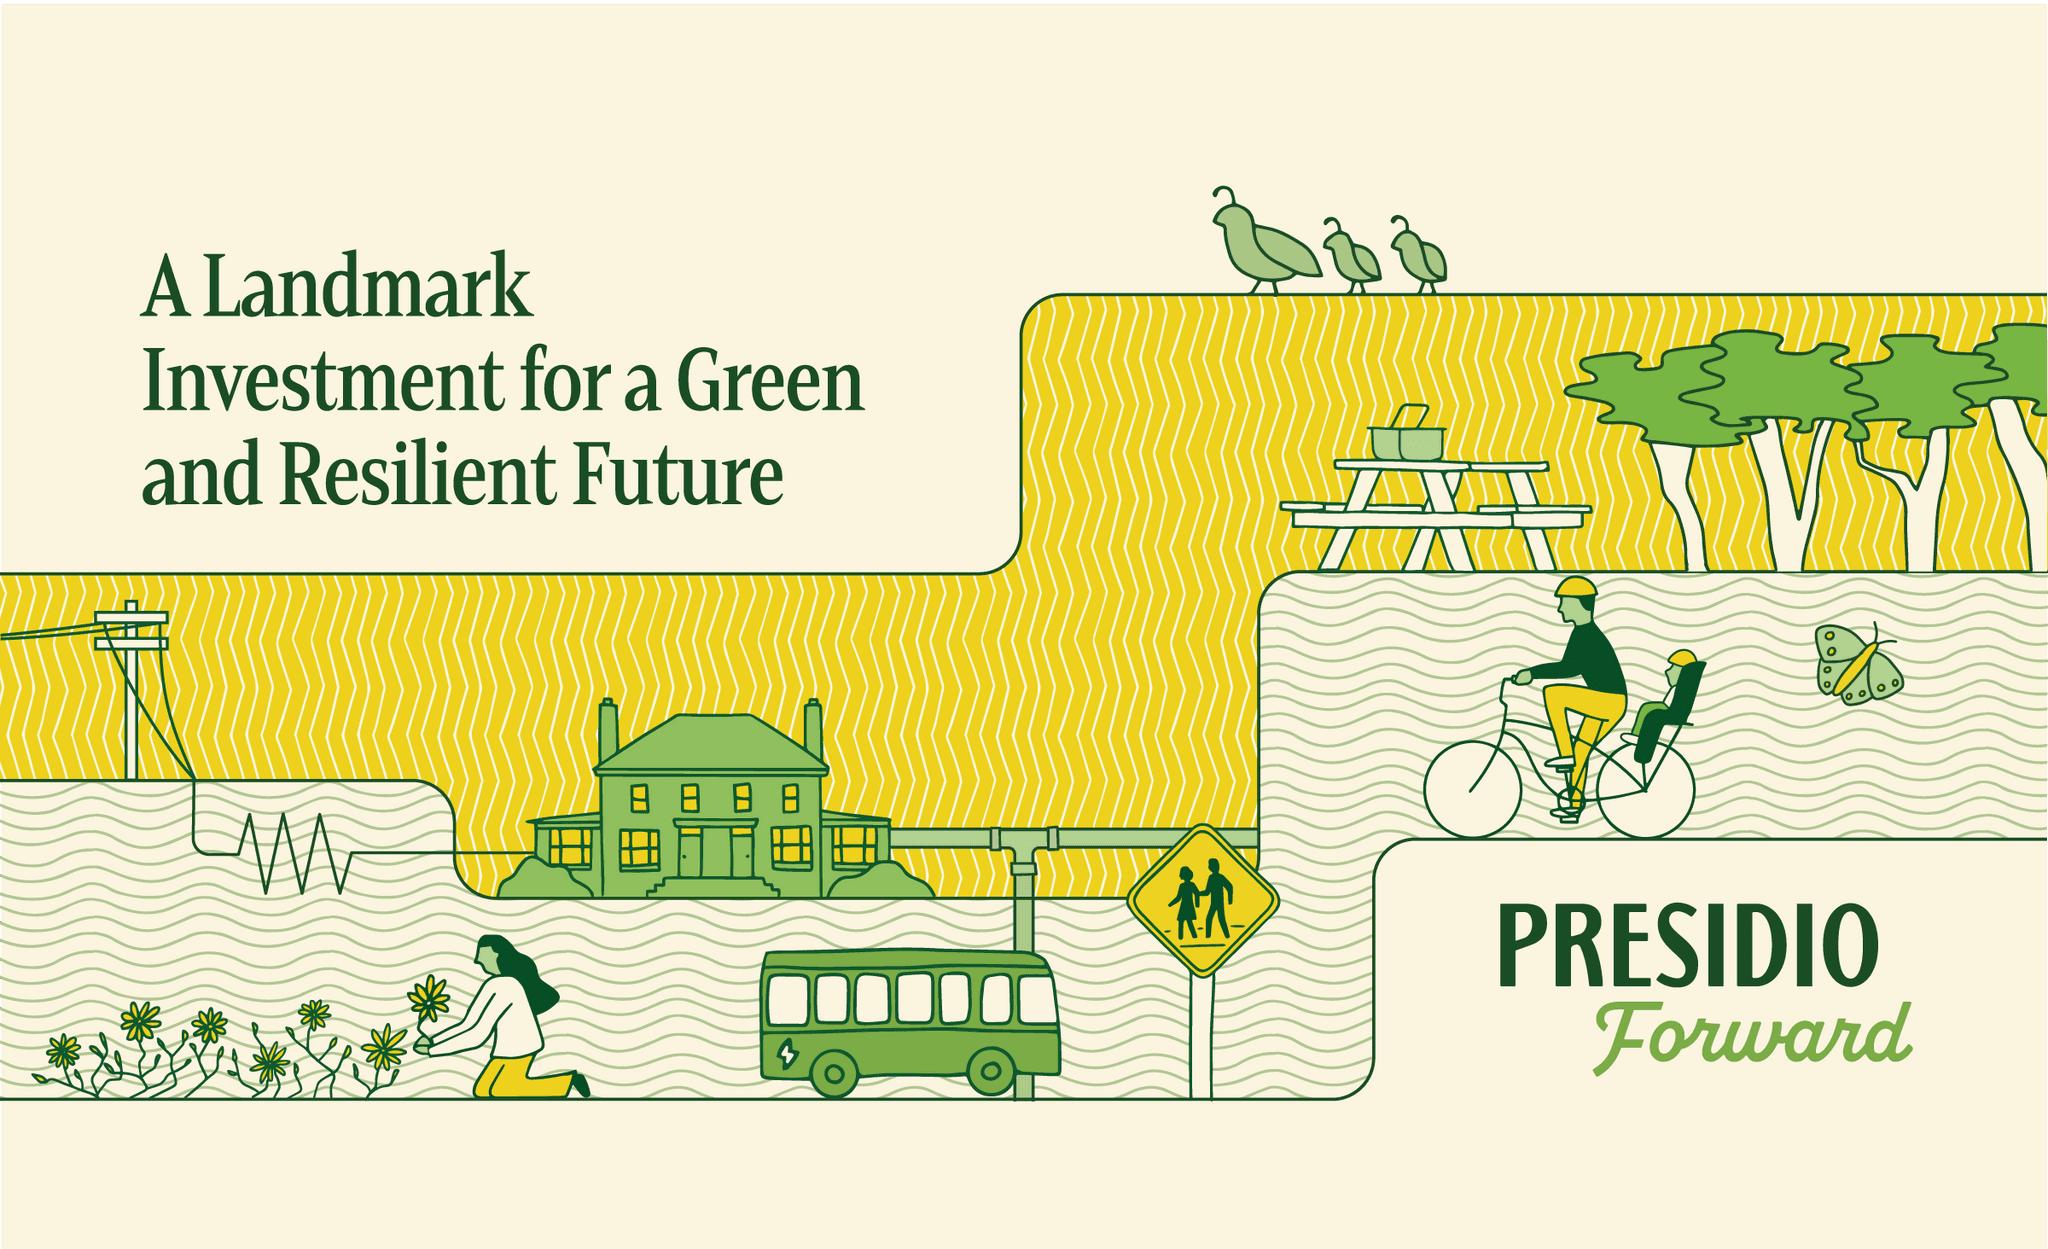 Presidio Forward campaign image with icons showing park improvements and text that reads "A Landmark Investment for a Green and Resilient Future"